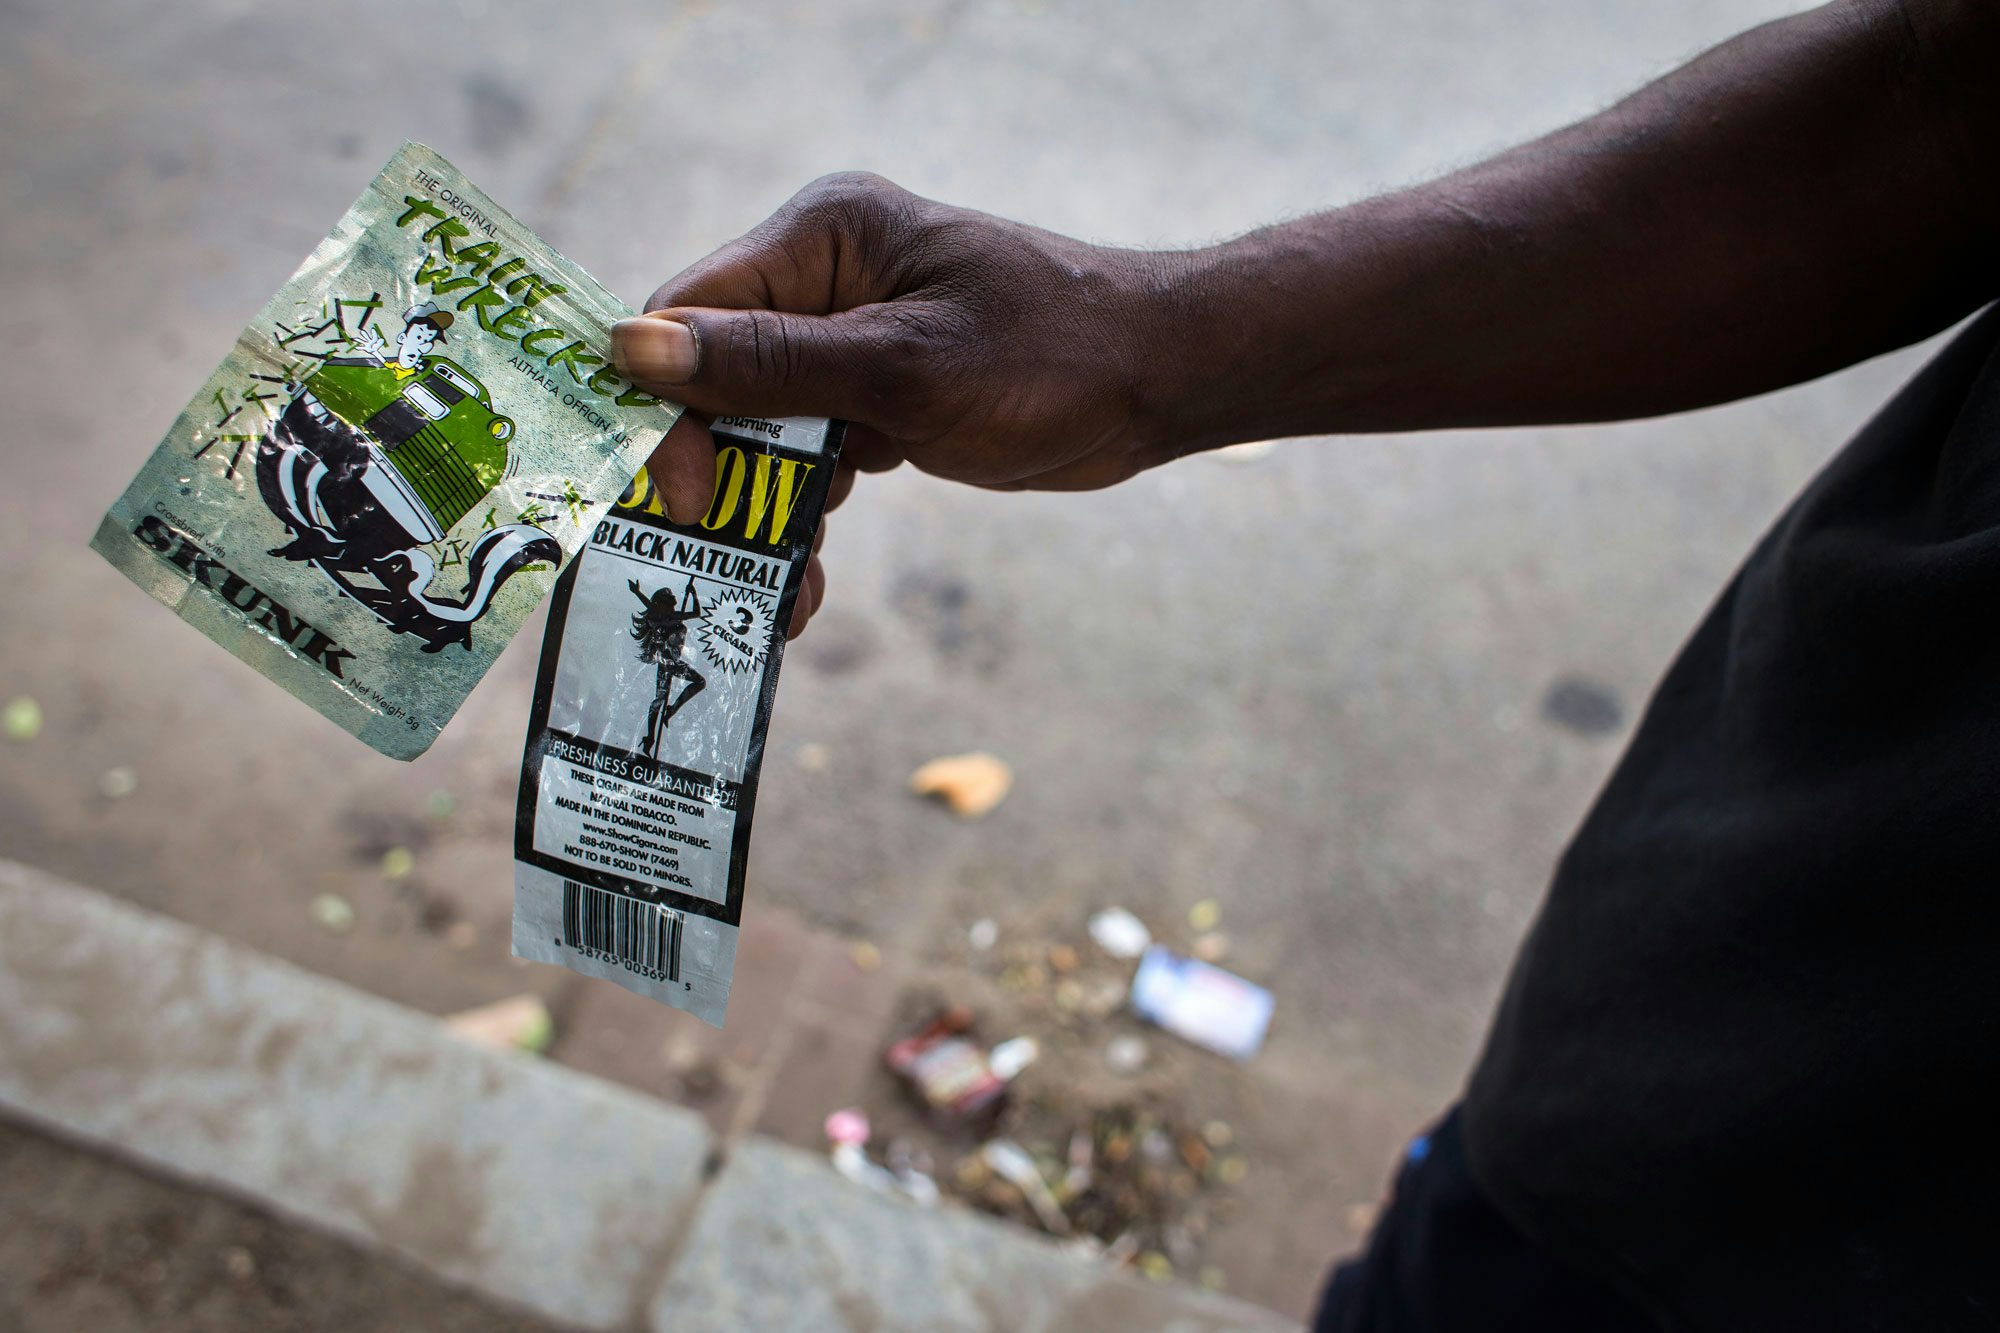 More people hospitalized by synthetic cannabis laced with rat poison More People Hospitalized By Synthetic Cannabis Allegedly Laced With Rat Poison